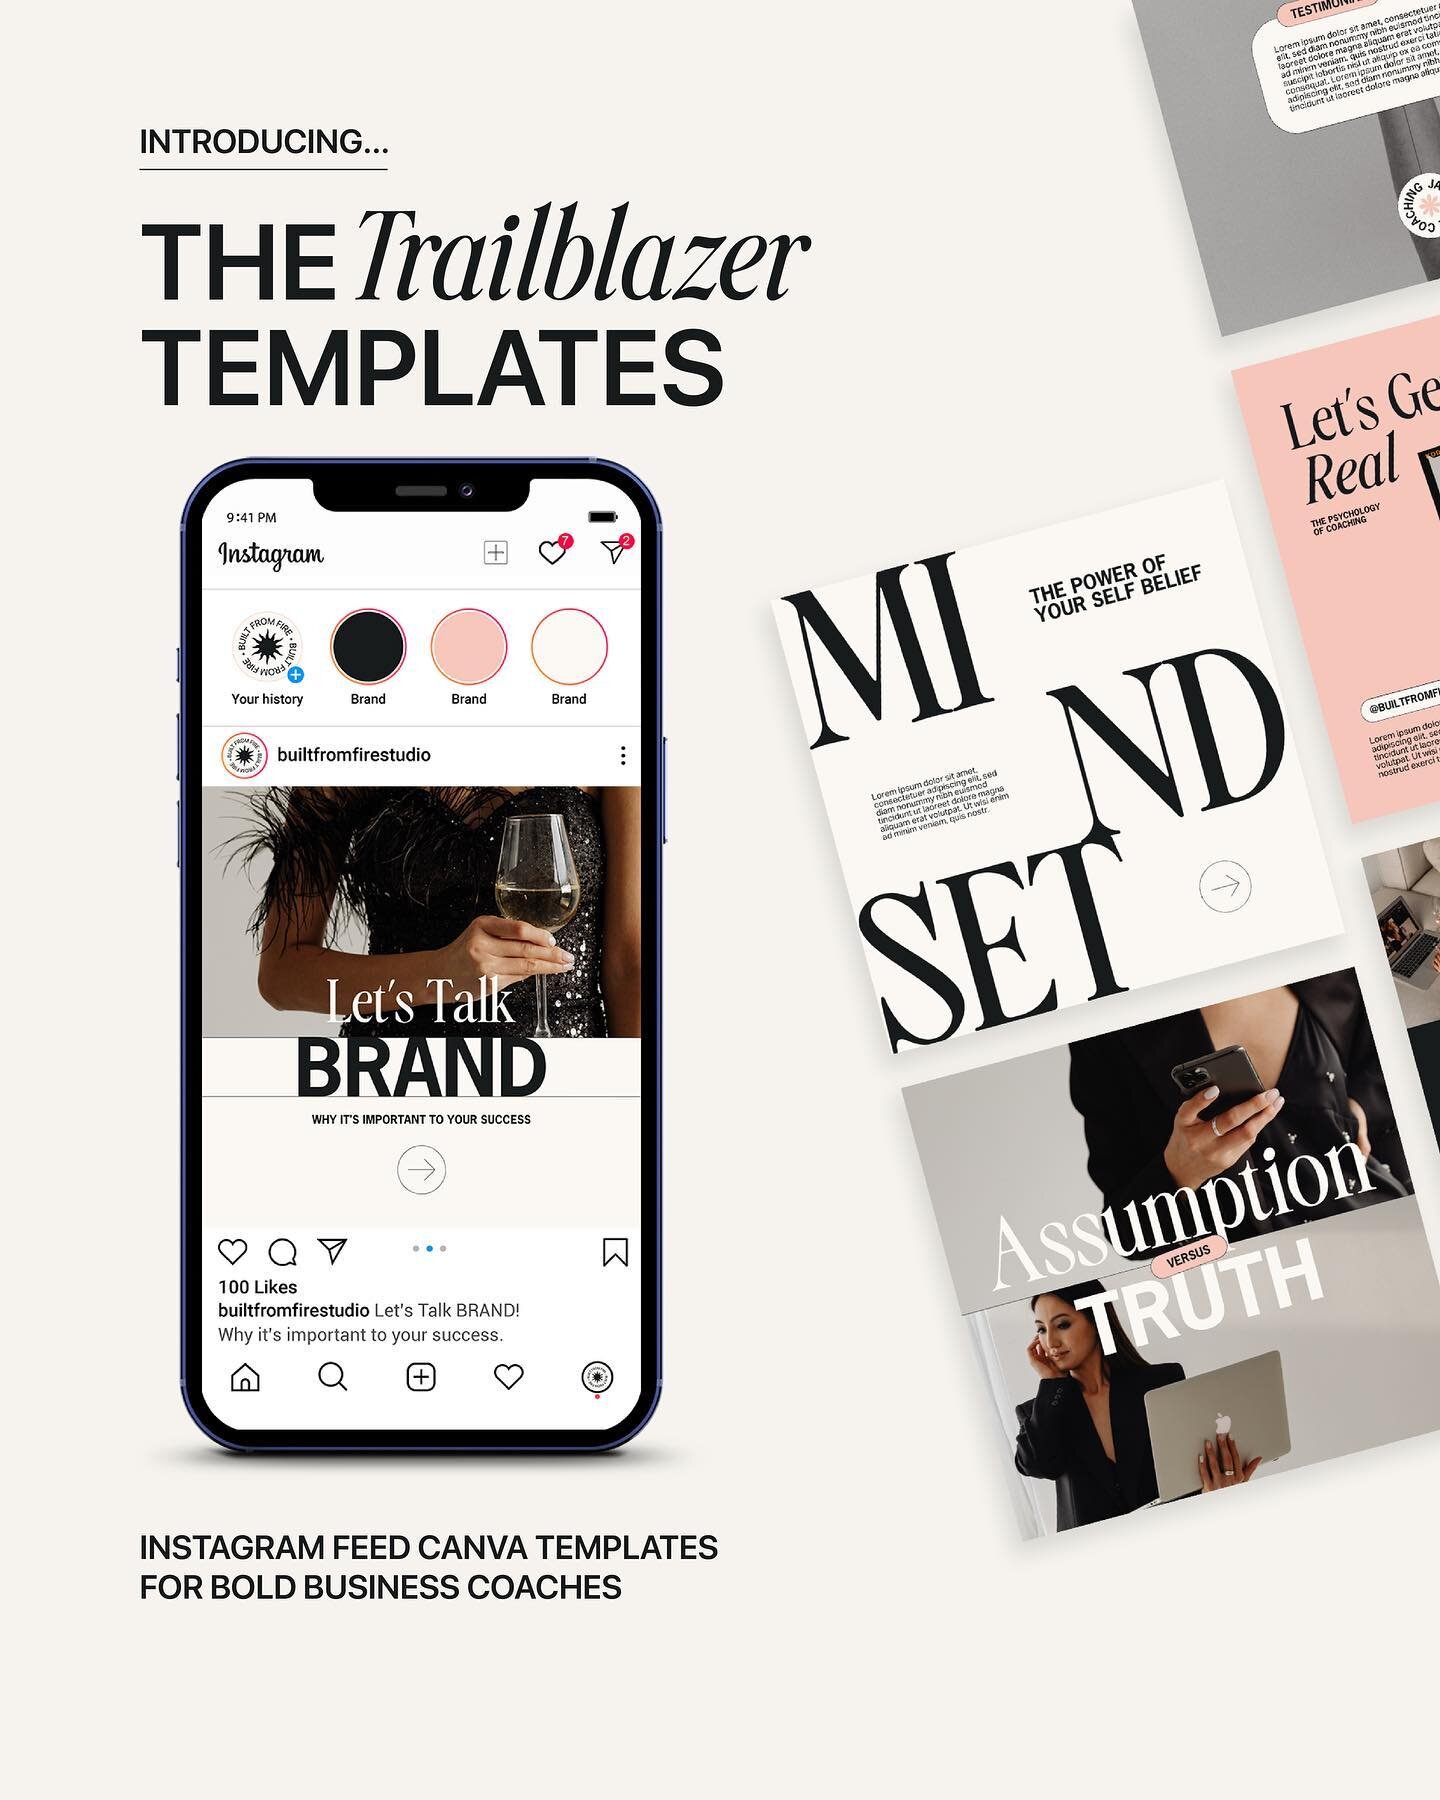 Our brand new TRAILBLAZER INSTAGRAM TEMPLATES have officially launched 🖤 

These are for the ground-breakers, the motivators and (of course) the trailblazers. If you&rsquo;re a coach or service provider struggling to create a cohesive and impactful 